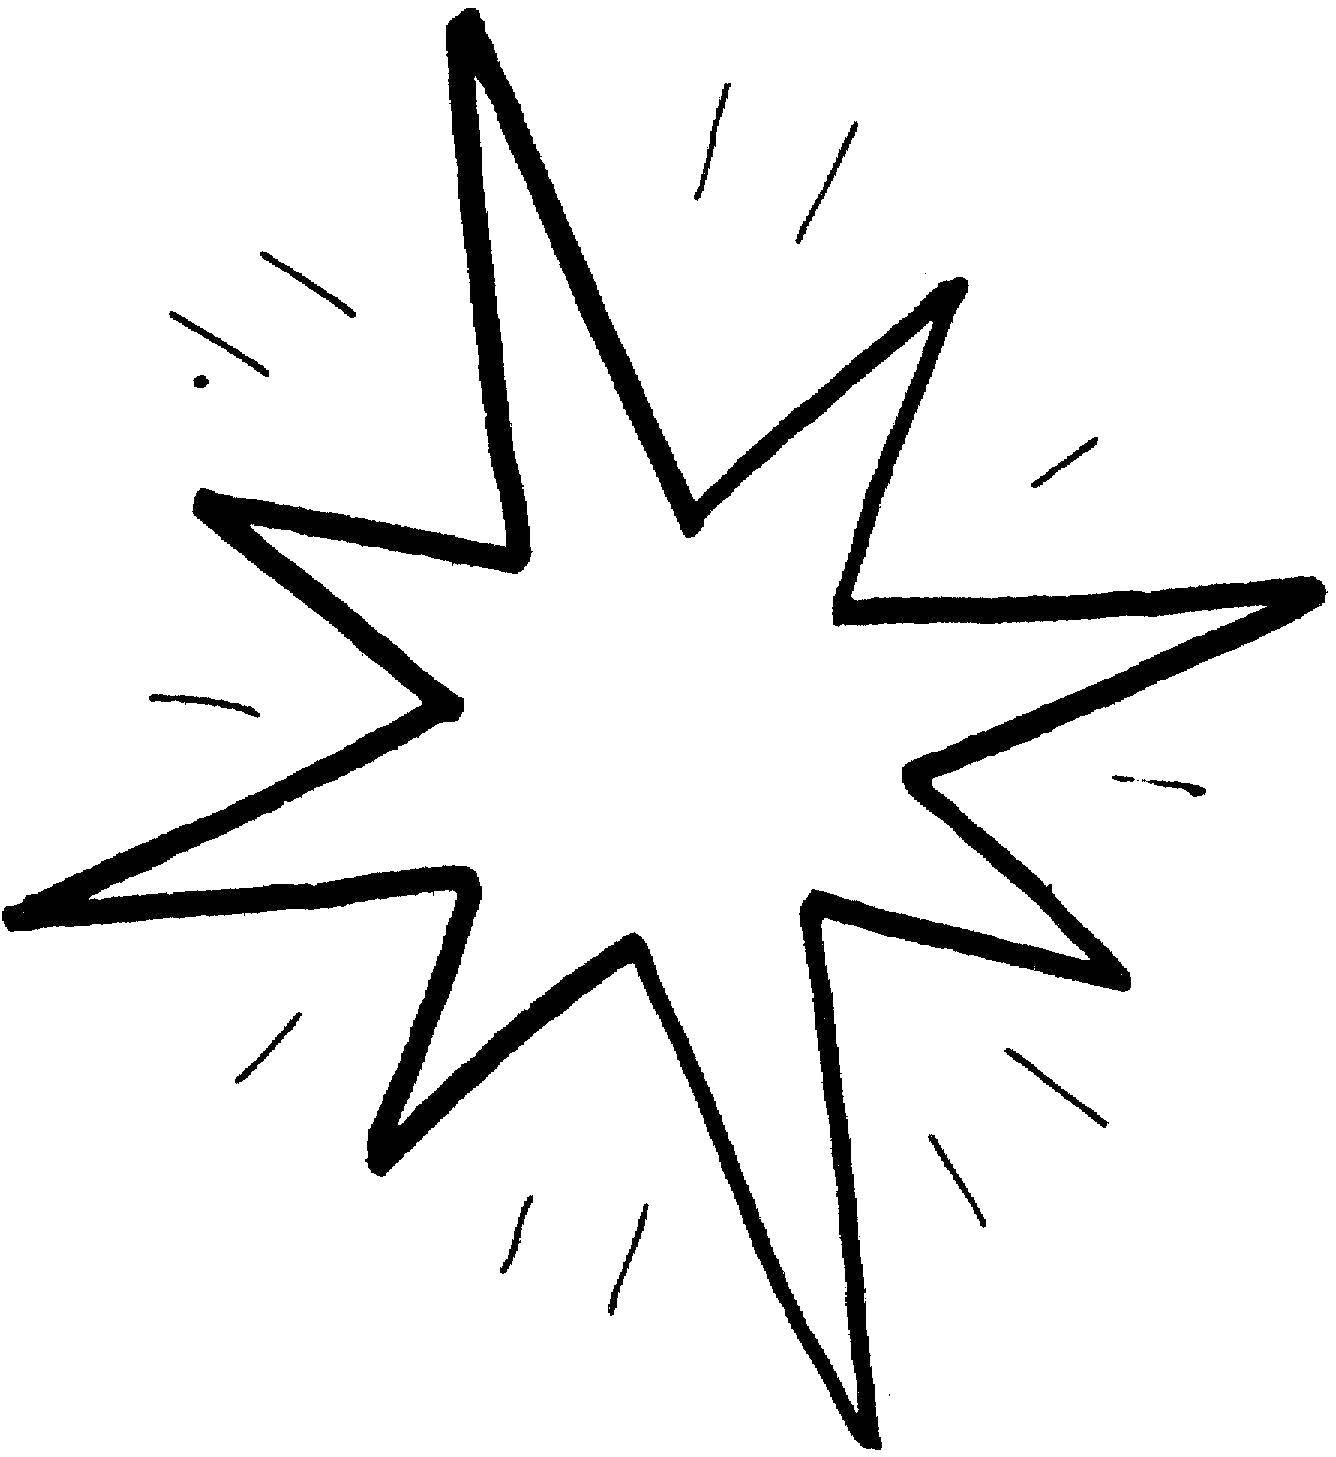 Coloring Star. Category star. Tags:  star.